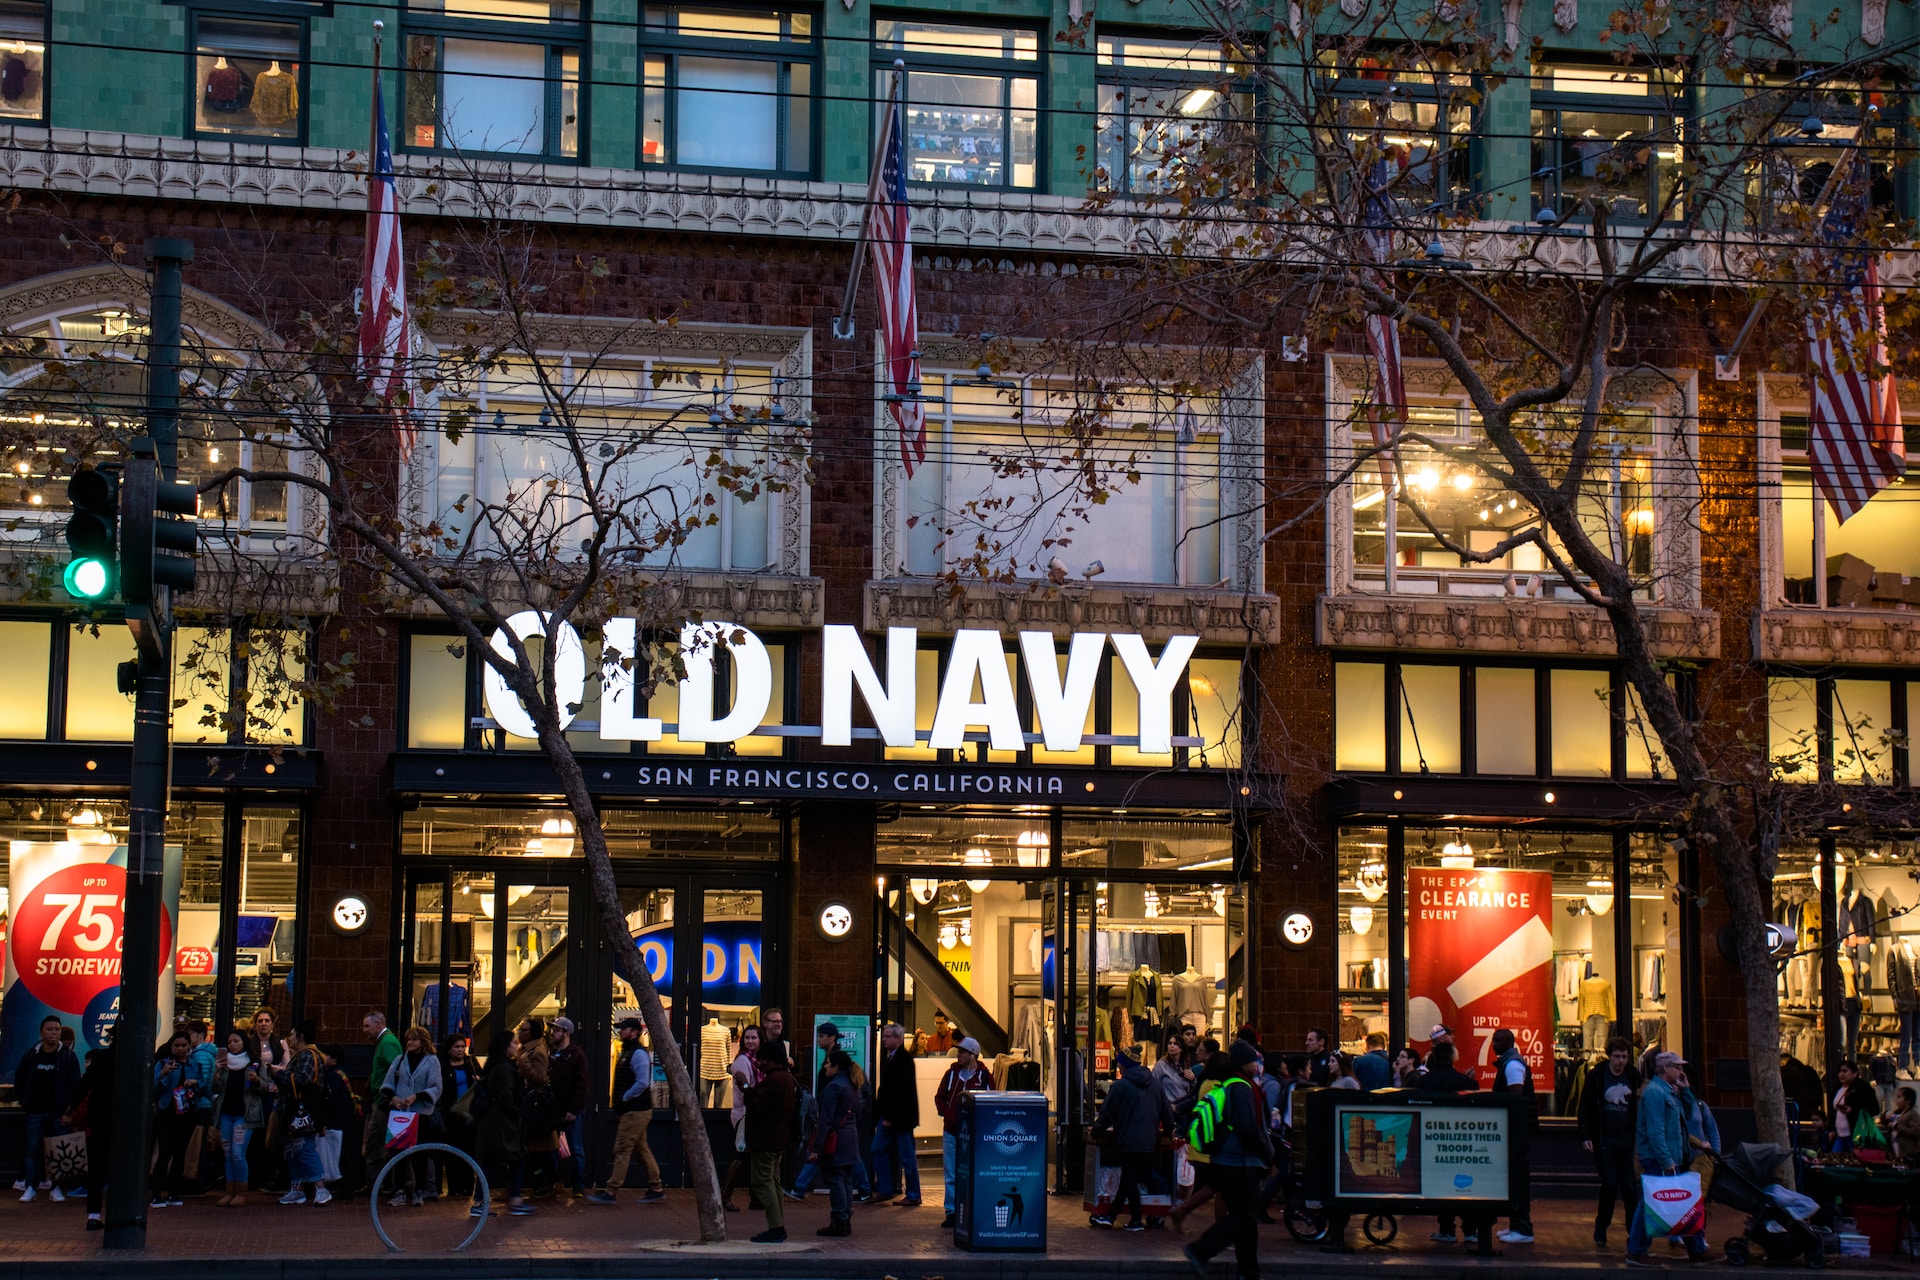 Old Navy Return Policy Everything You Need to Know